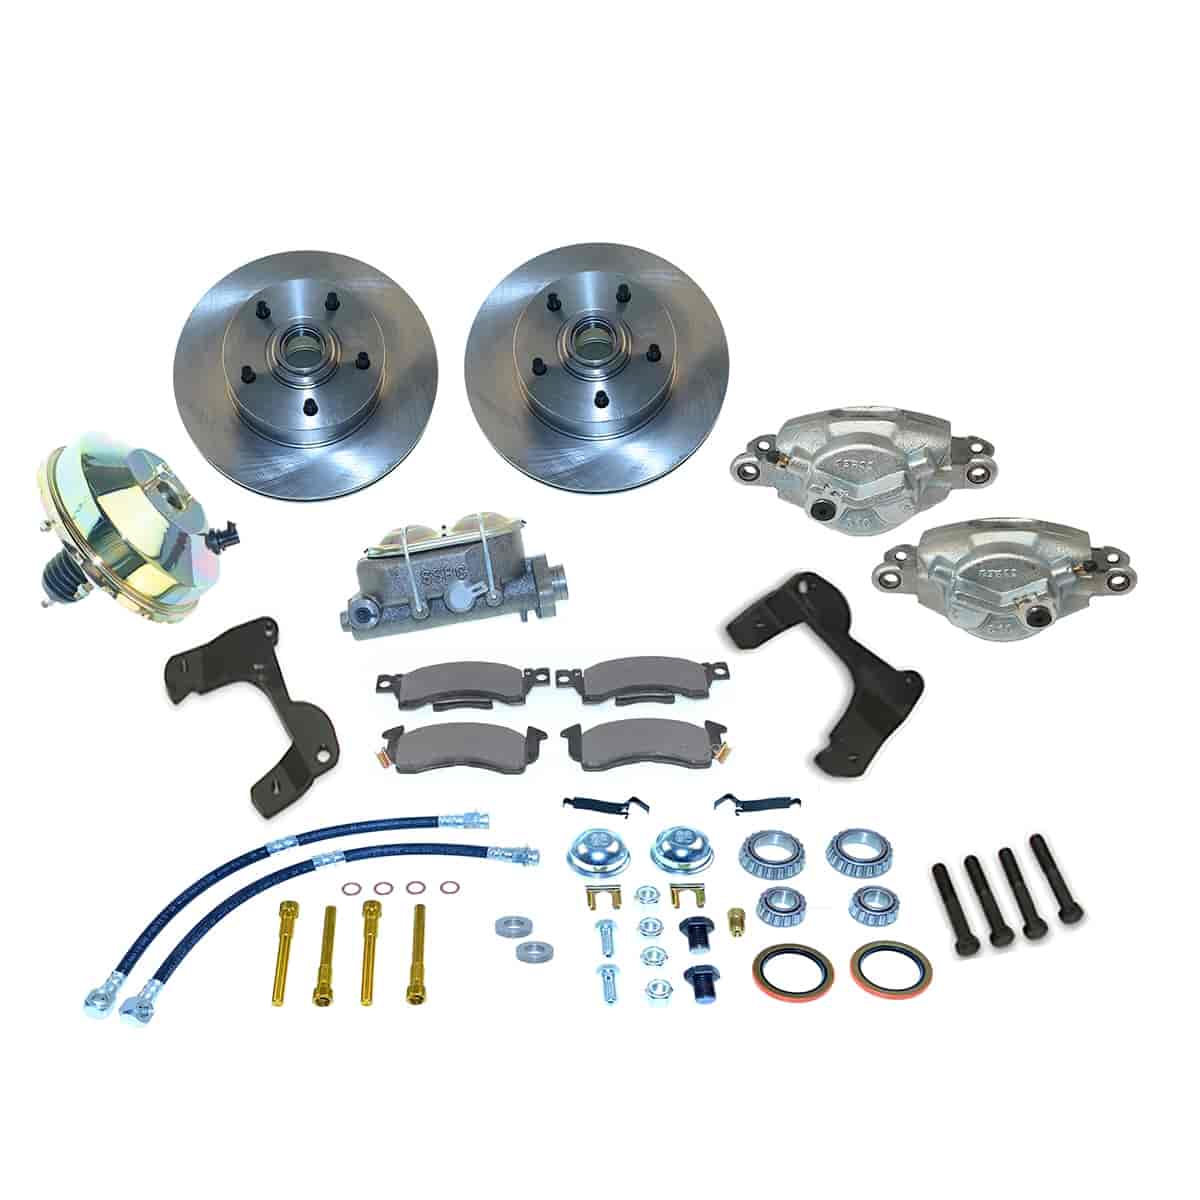 Front Drum-to-Disc Brake Conversion Kit 1955-58 Full-Size Chevy Car